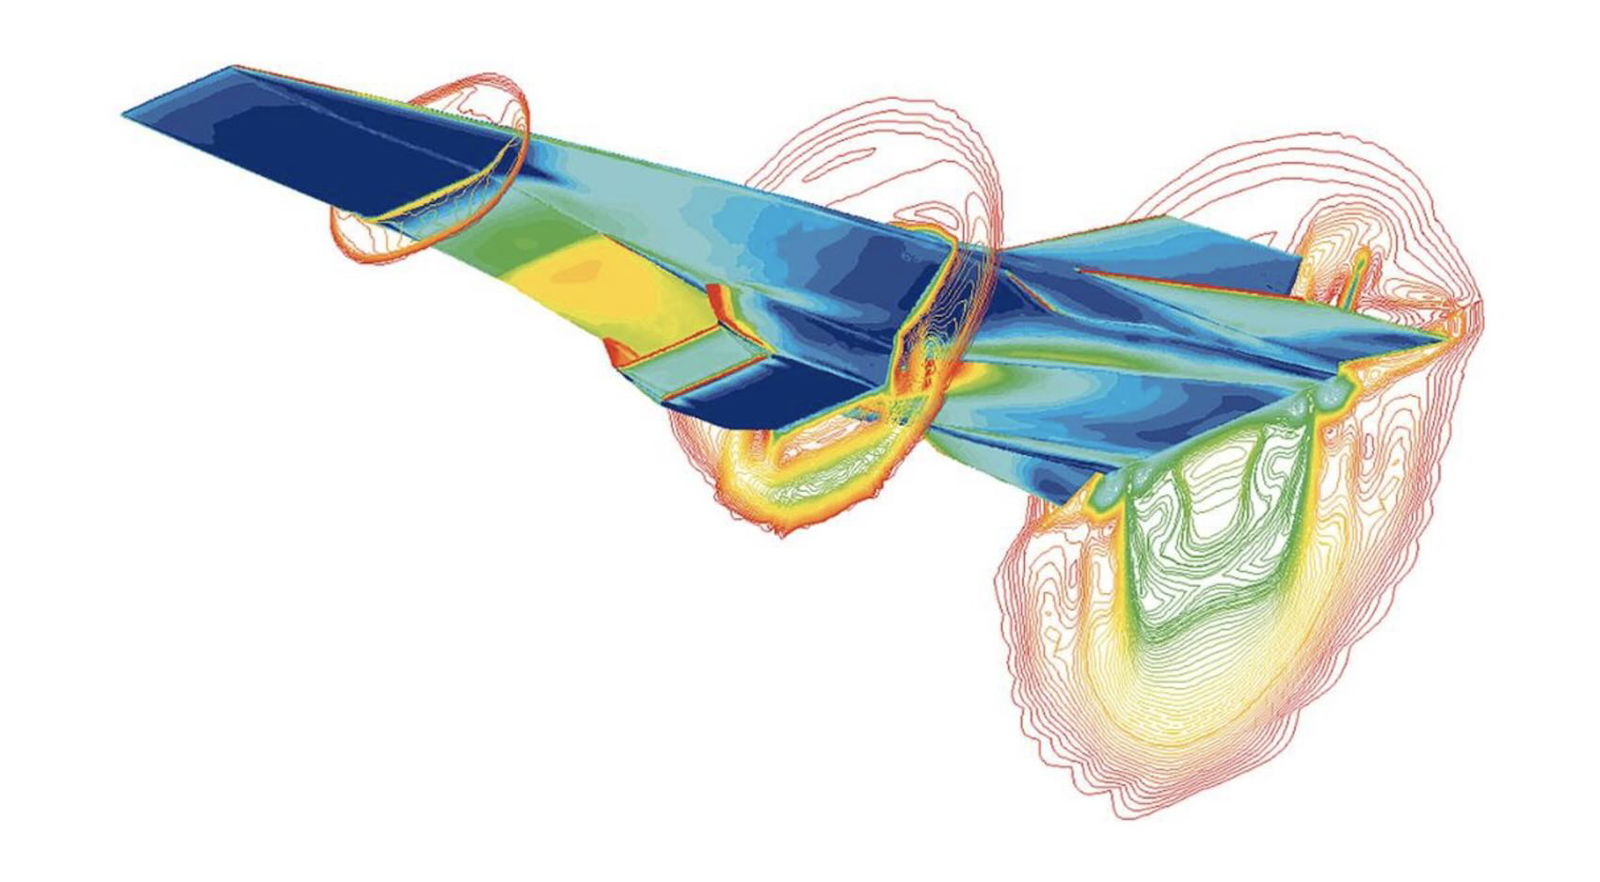 NASA-Funded Hypersonic Breakthrough Can Eliminate Deadly “Shock Train” at the Speed of Light